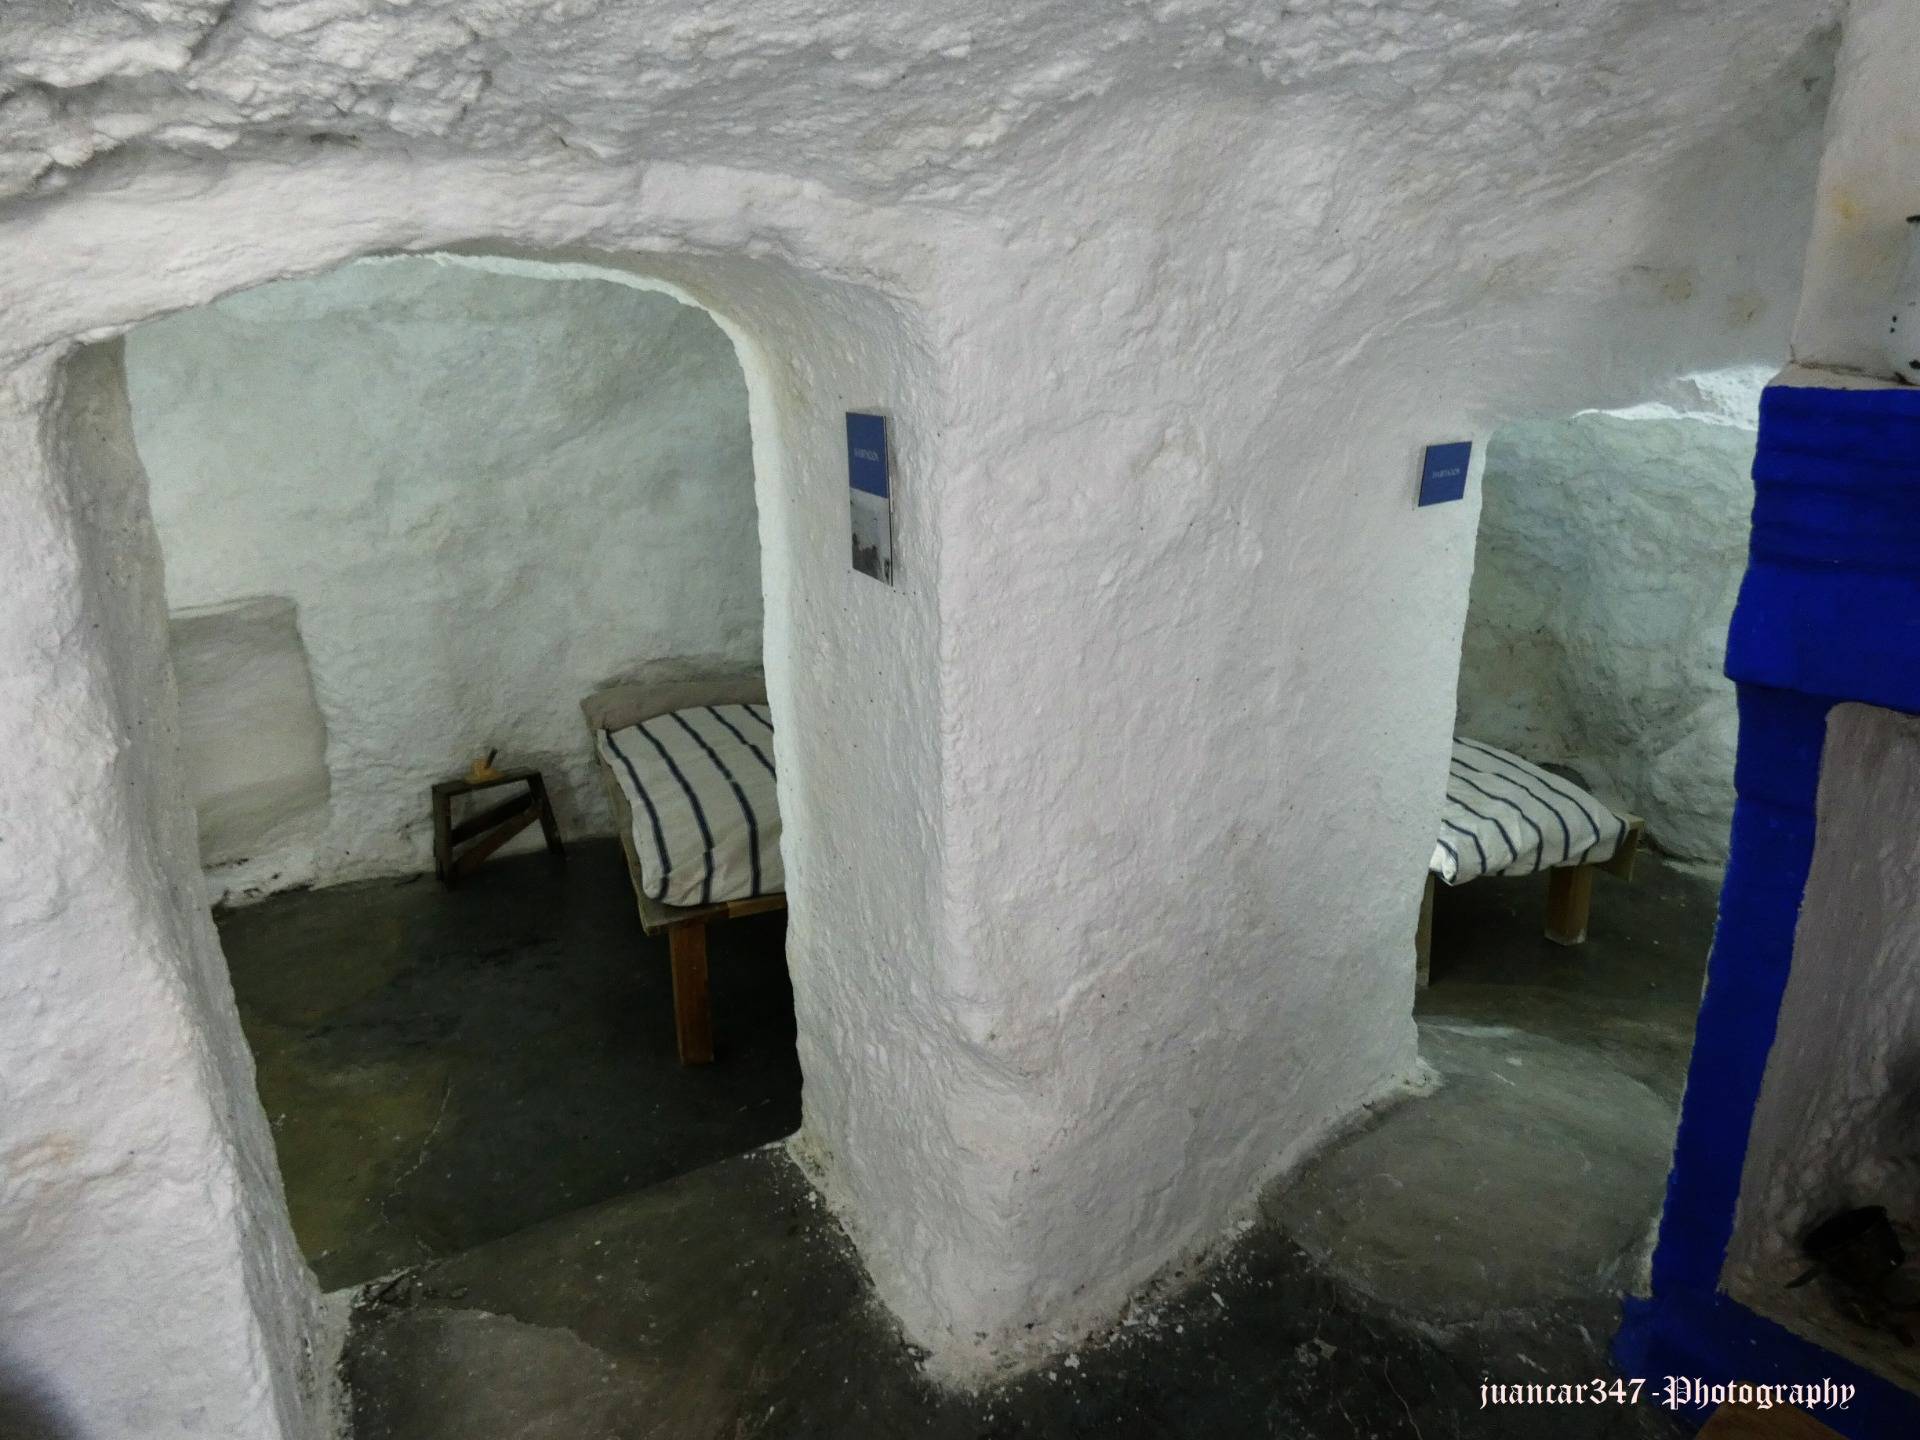 Partial view of the two small rooms